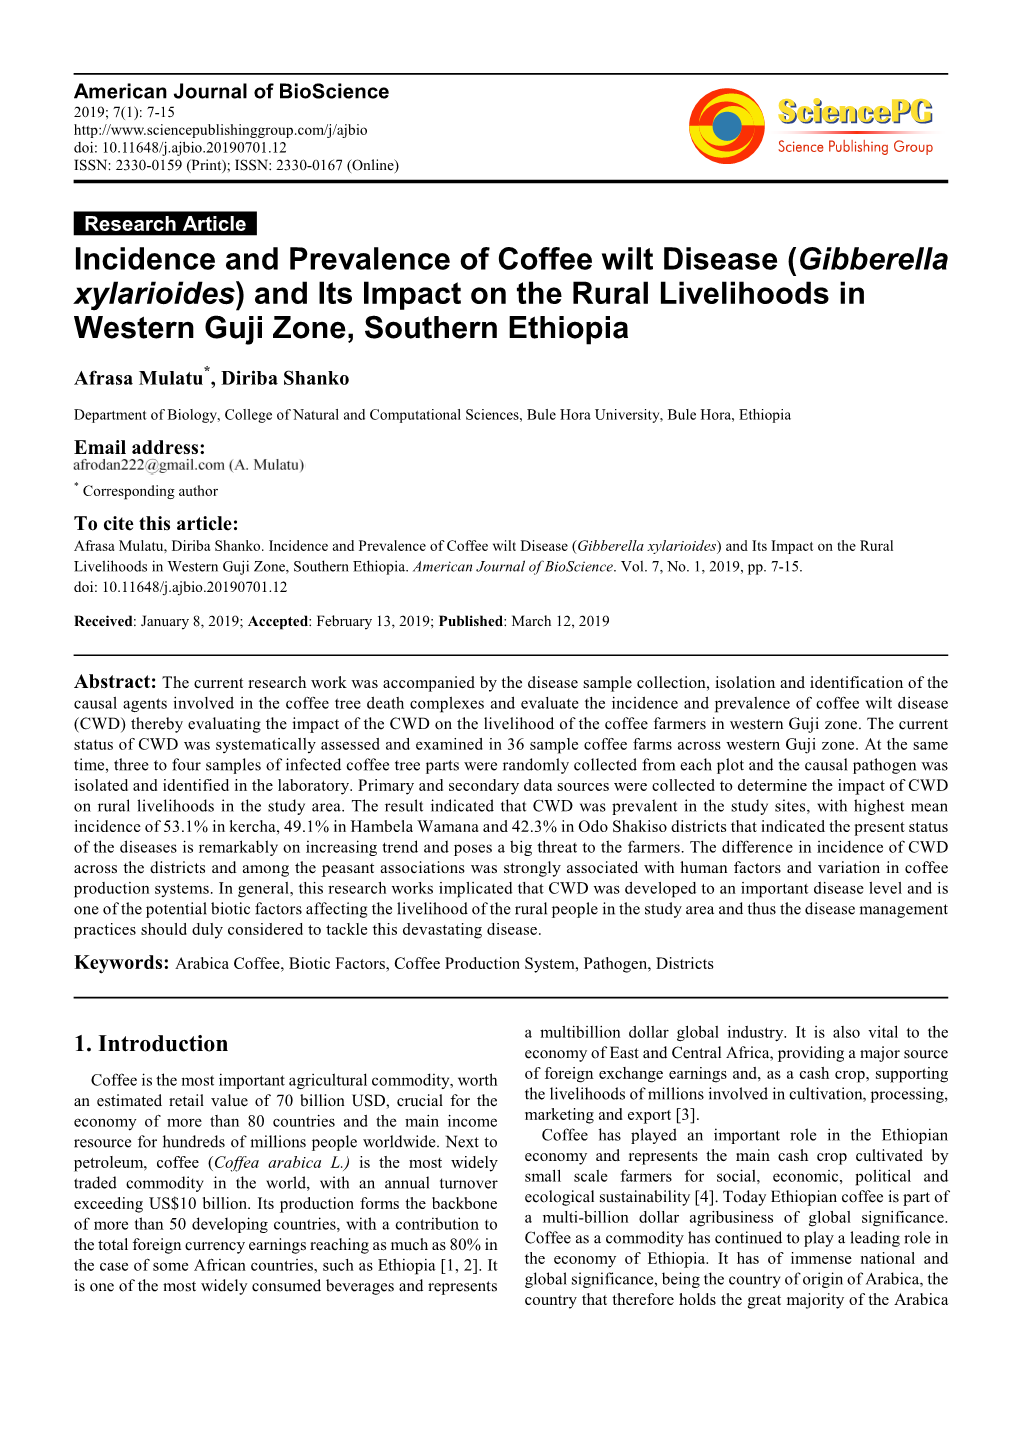 Incidence and Prevalence of Coffee Wilt Disease (Gibberella Xylarioides ) and Its Impact on the Rural Livelihoods in Western Guji Zone, Southern Ethiopia